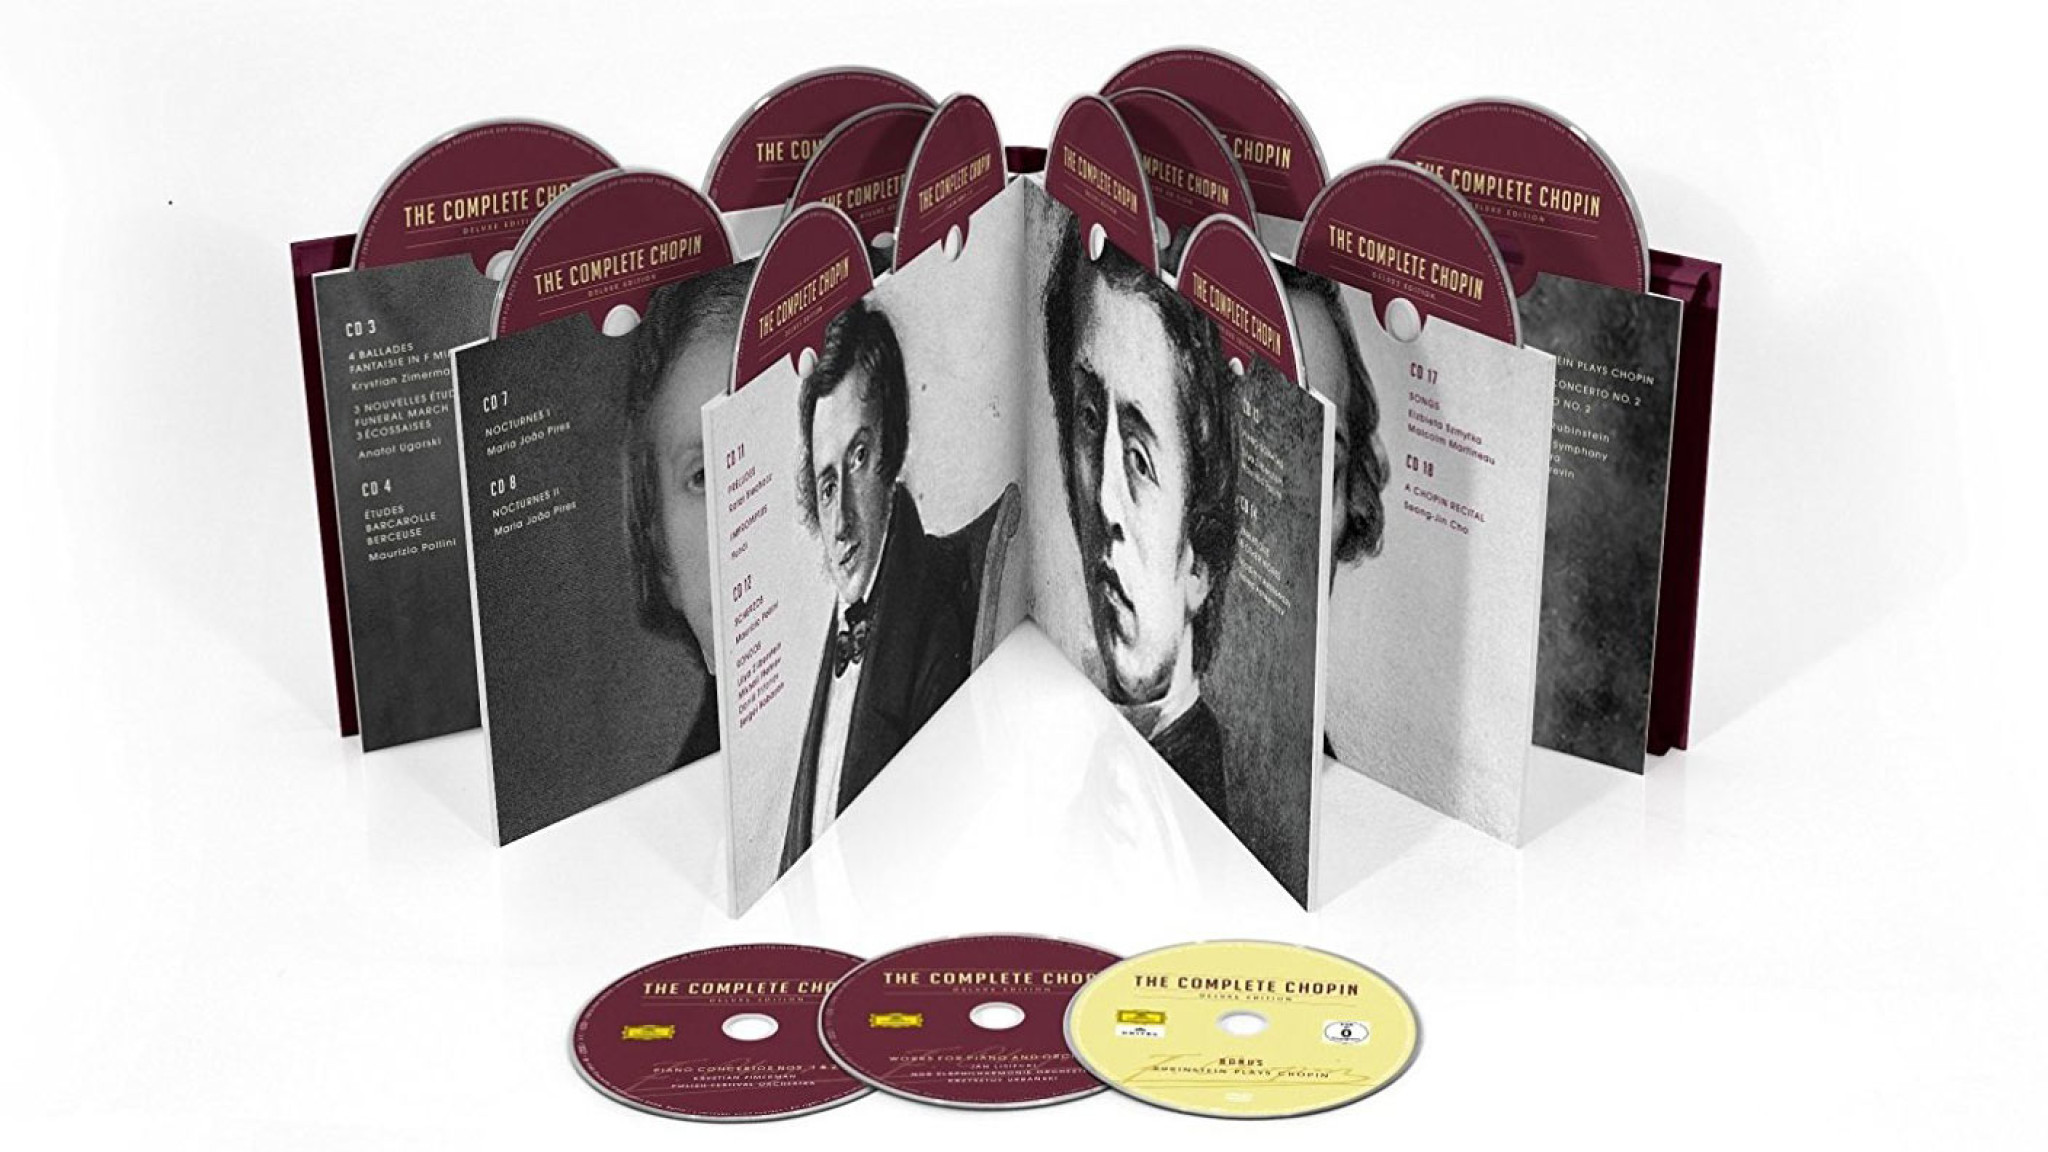 Complete Chopin Deluxe Edition